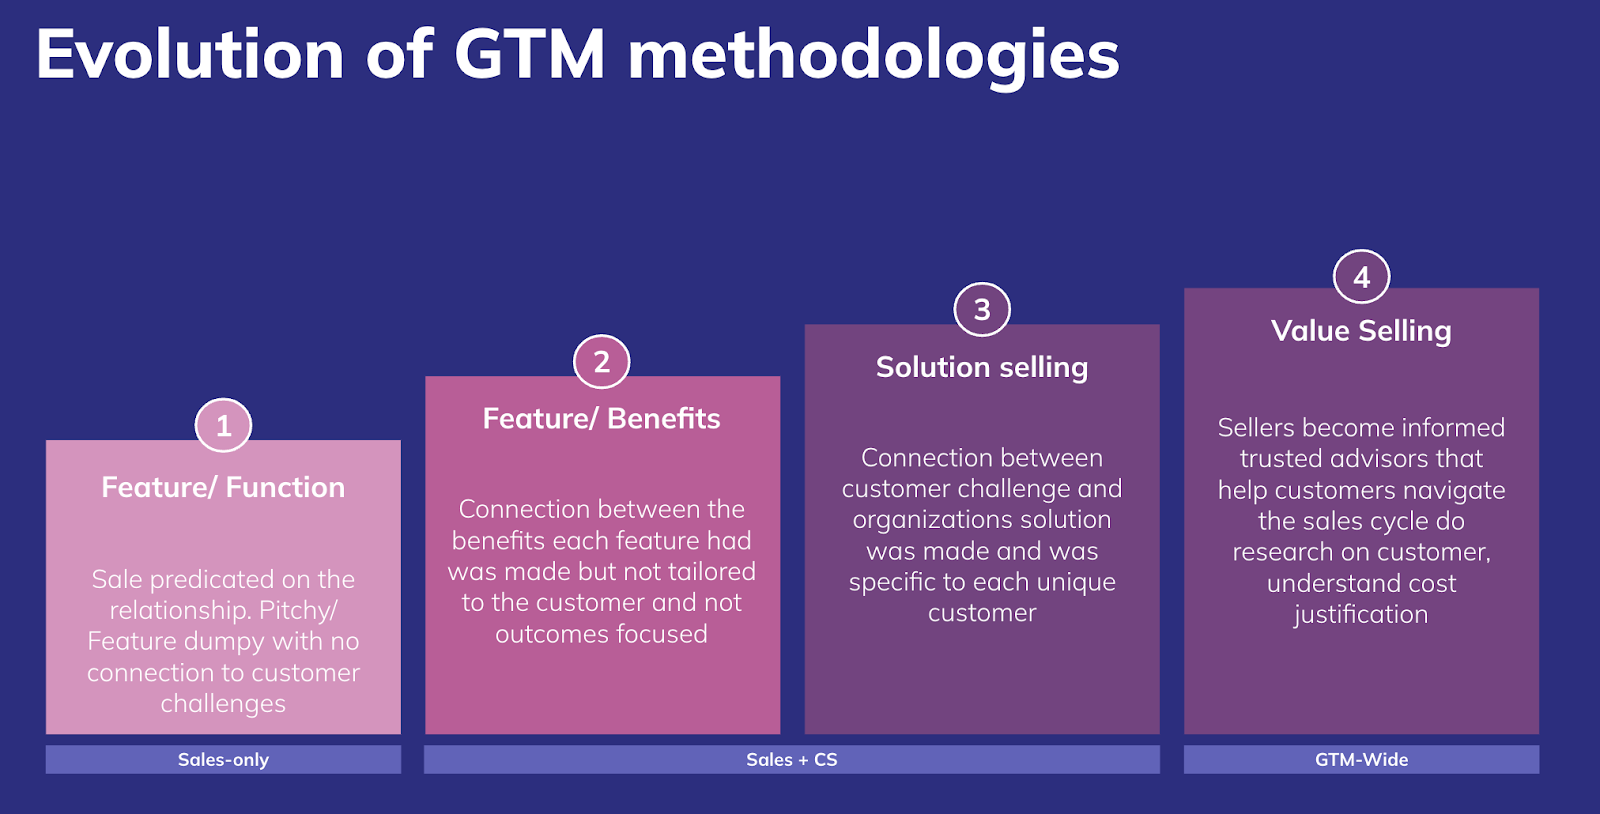 An image depicting the evolution of GTM methodologies, from Feature/Function at Step 1, to Feature/Benefits at Step 2, Solution selling at Step 3, and Value Selling at Step 4. 